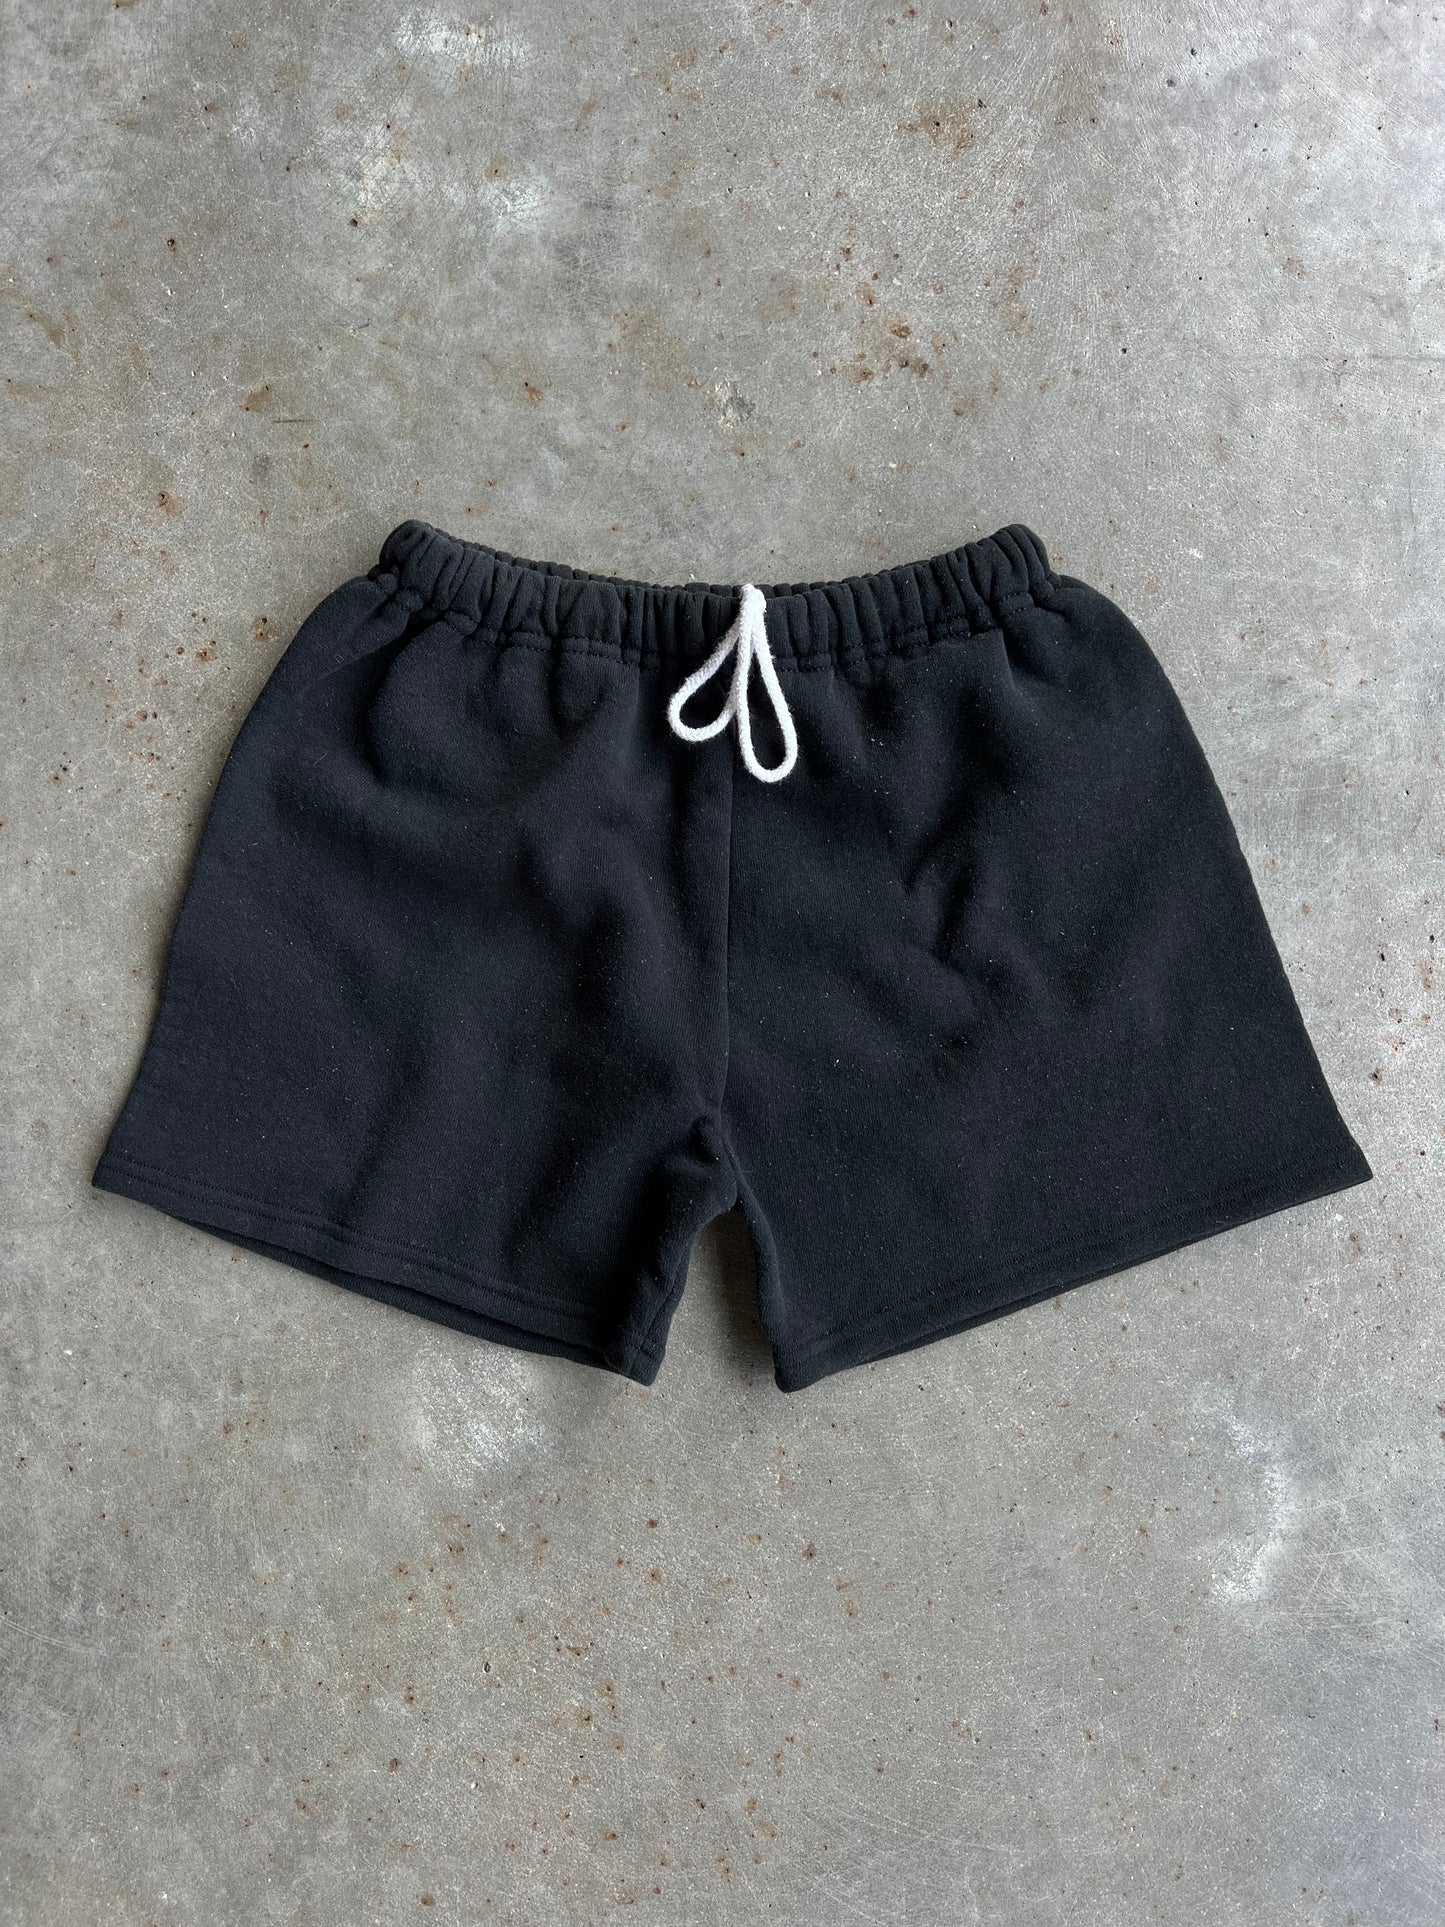 Black Reworked Shorts - Youth XL